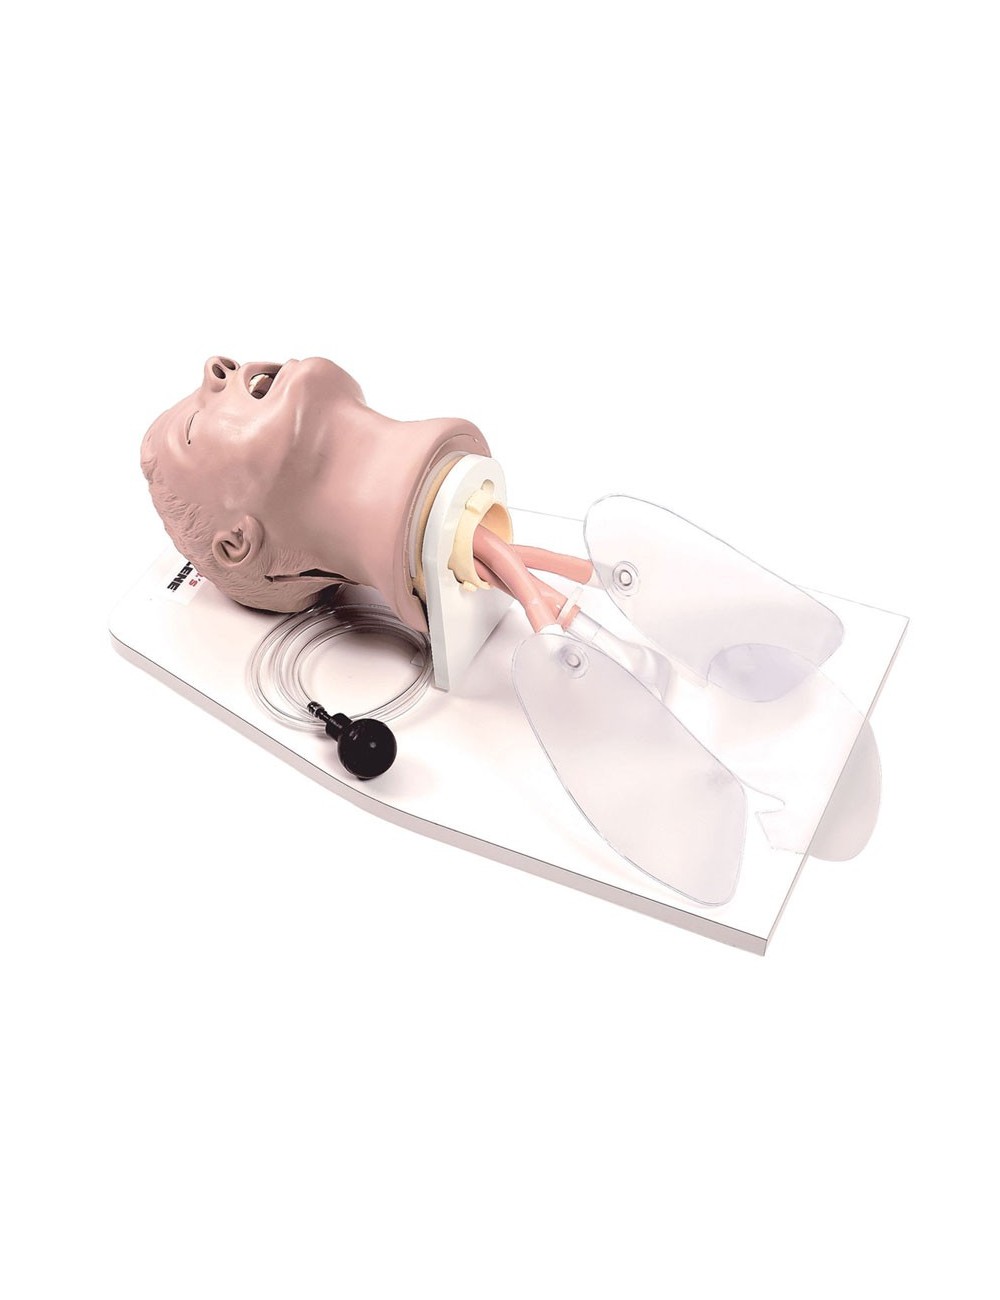 TETE D' INTUBATION ADULTE A/SUPPORT "AIRWAY LARRY" DE LIFE/FORM